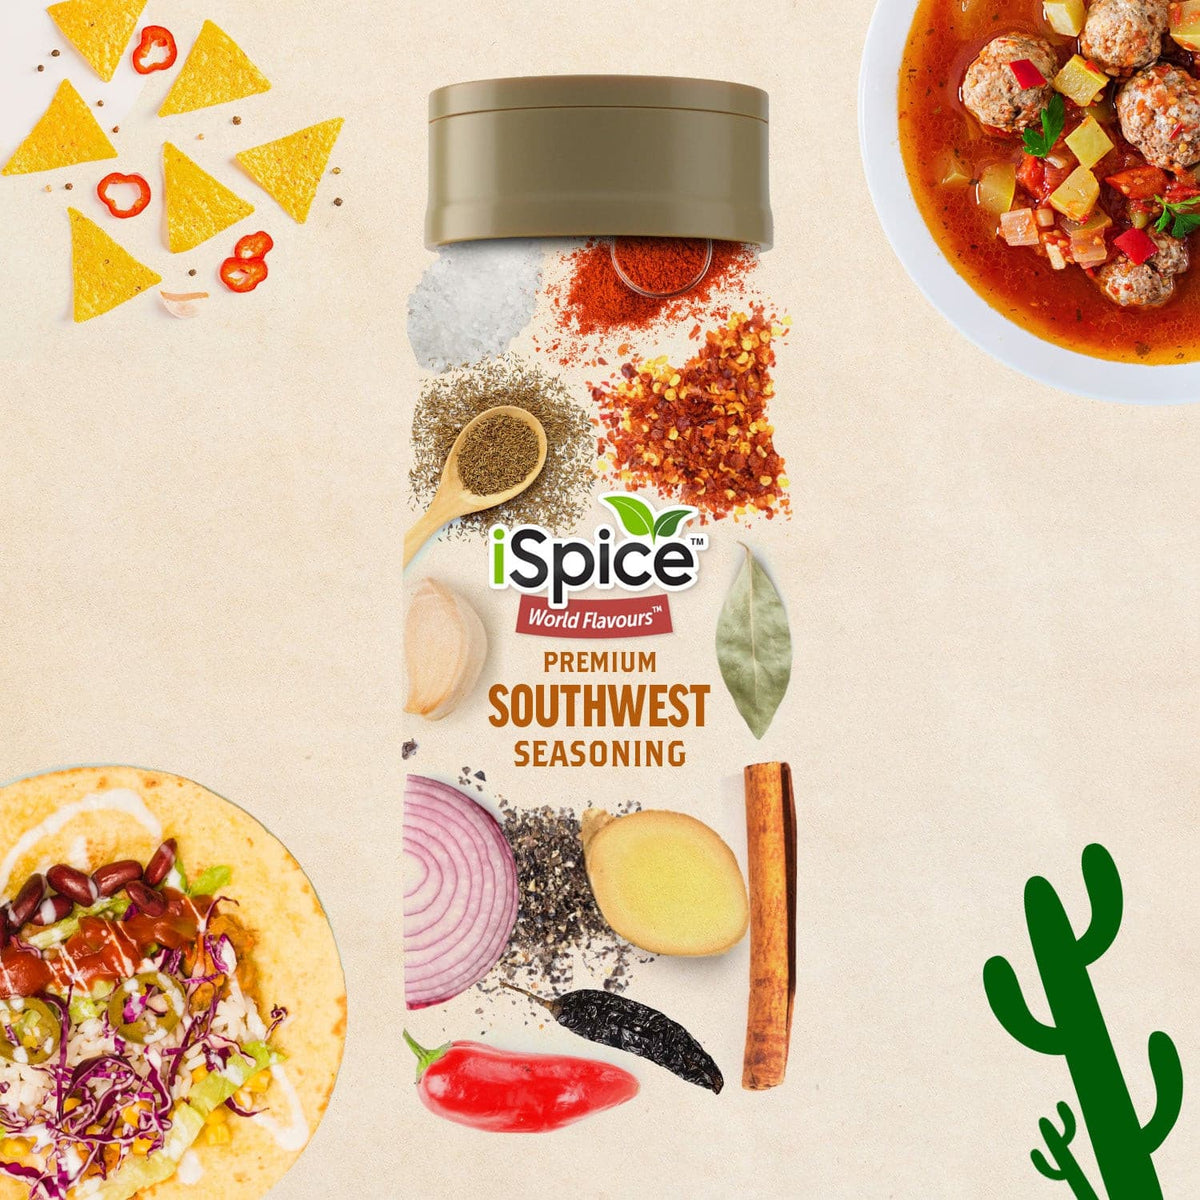 5 Tasty Recipes Using Southwest Seasoning to Spice Up Your Dinner